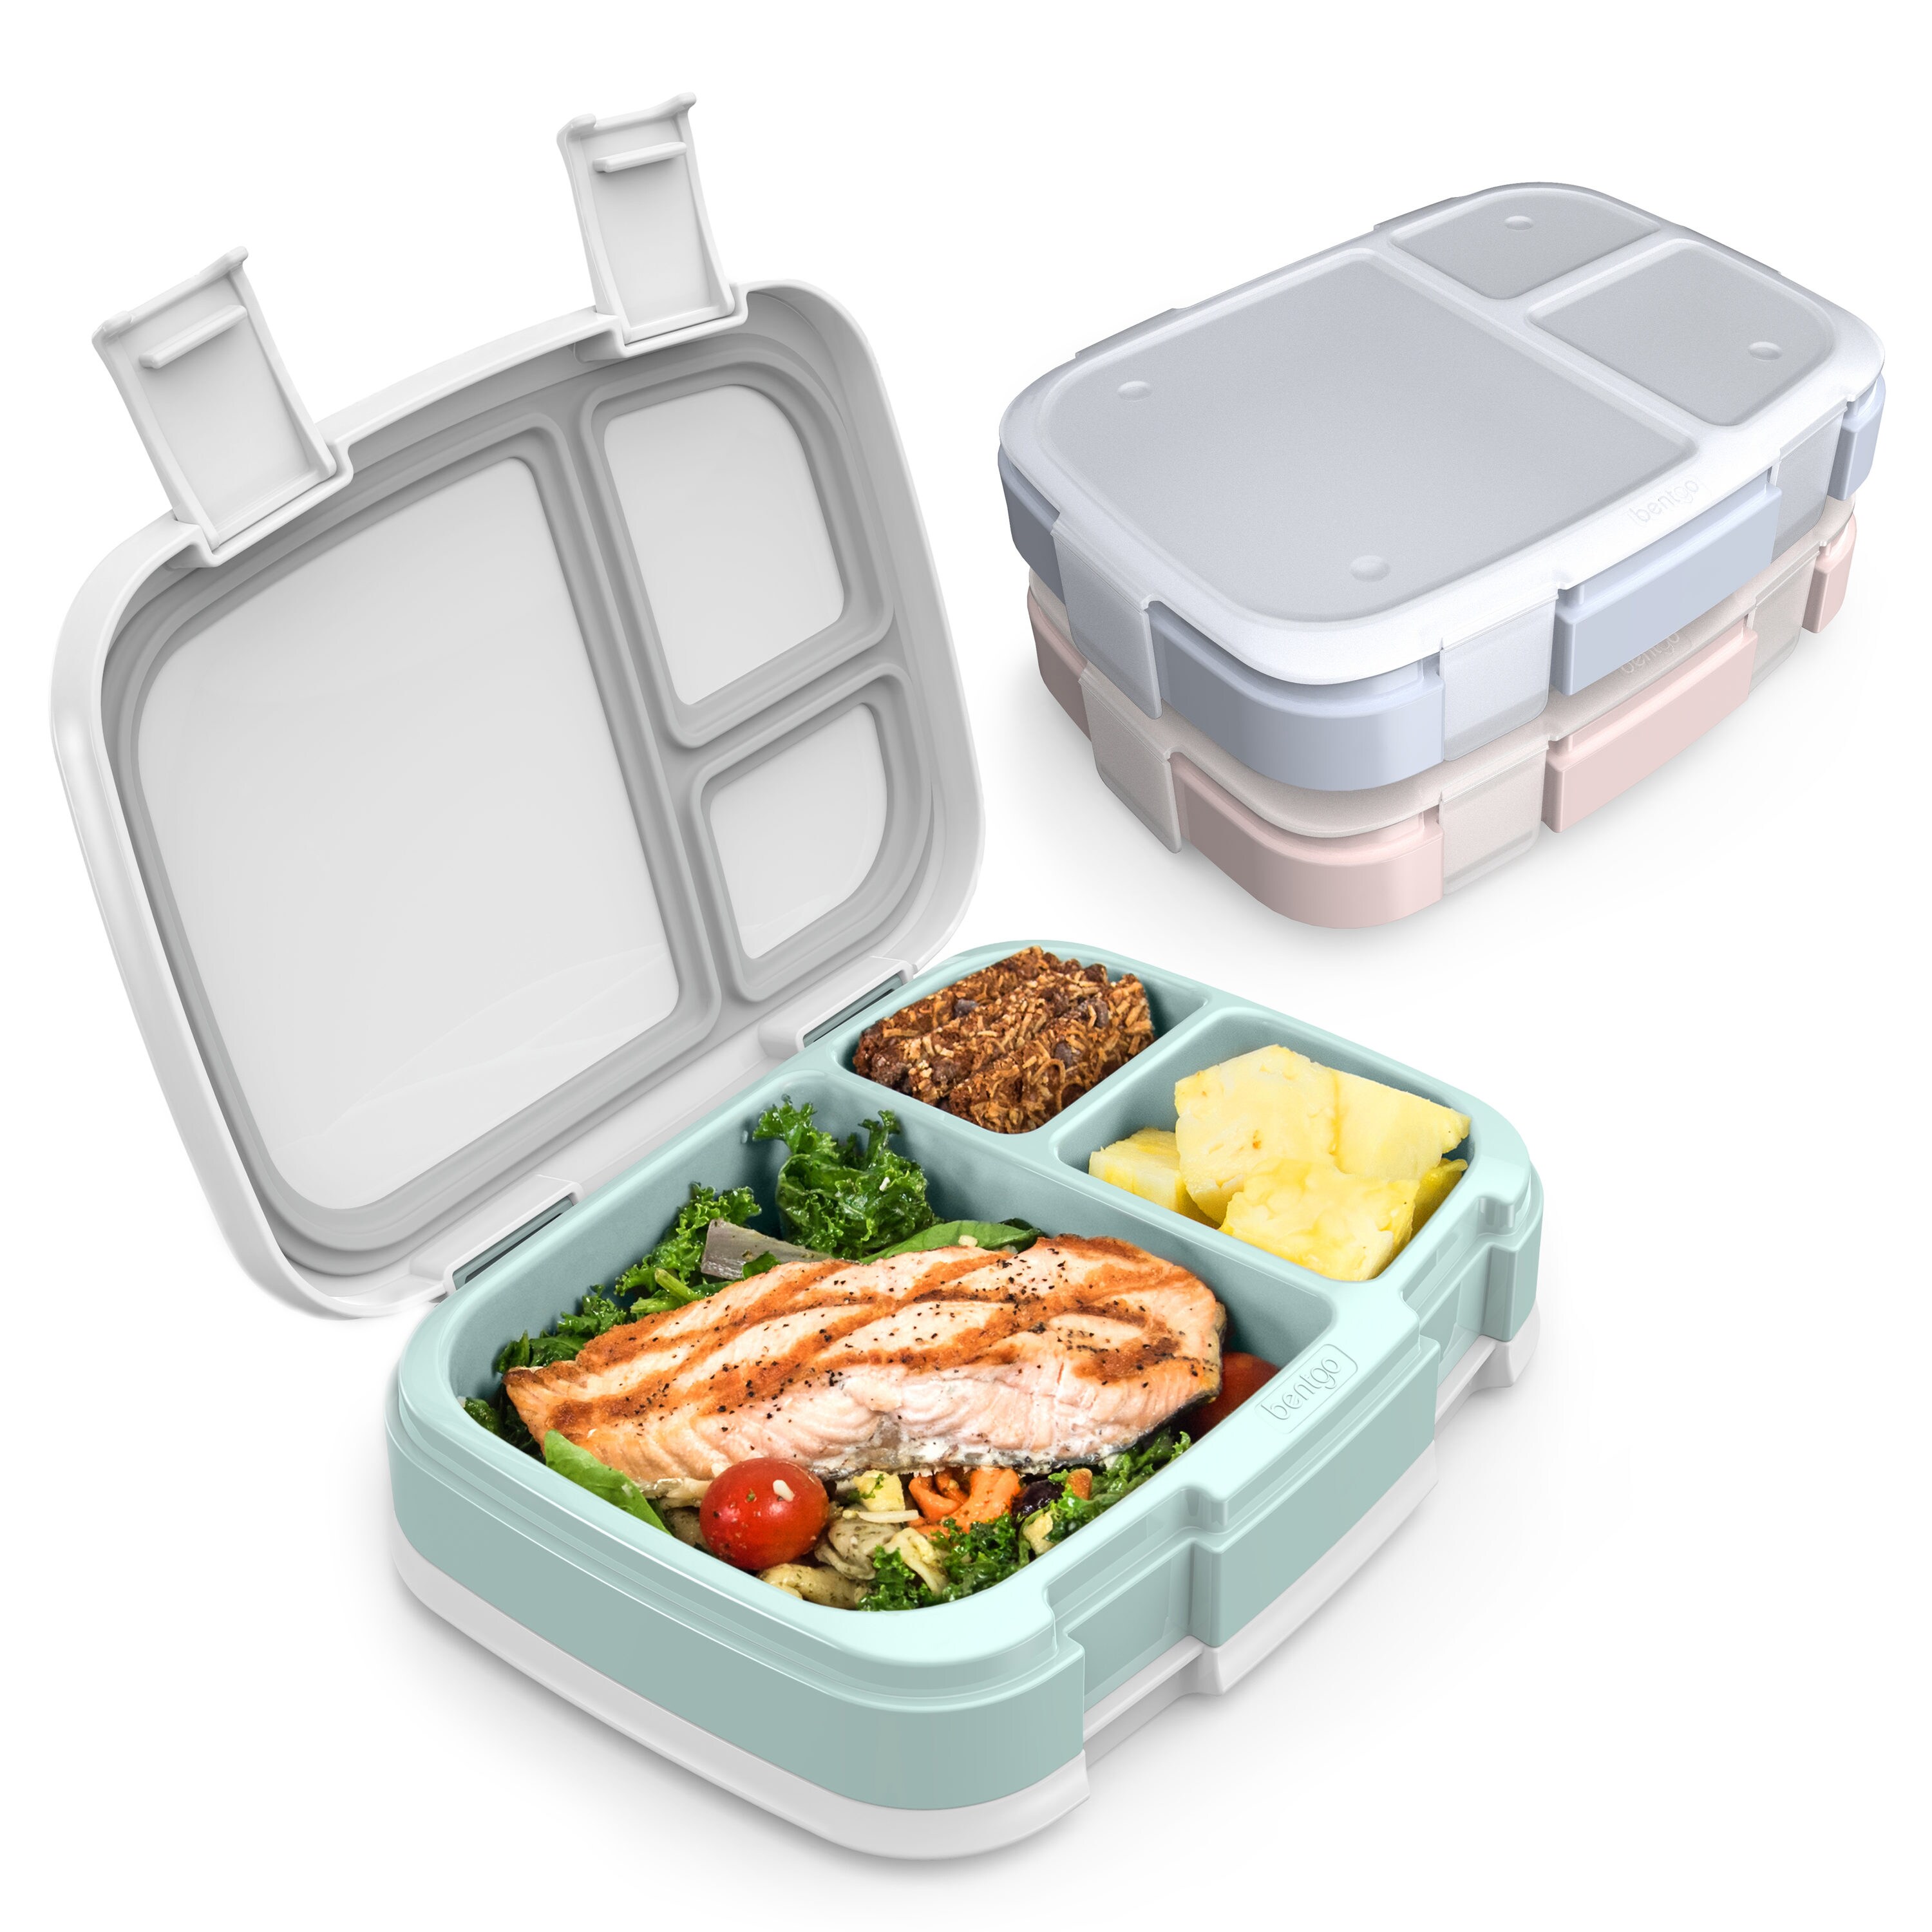 150 Sets 28 oz Takeout Bento Boxes With Lids Adults Lunch Box For Hot Meal Prep 